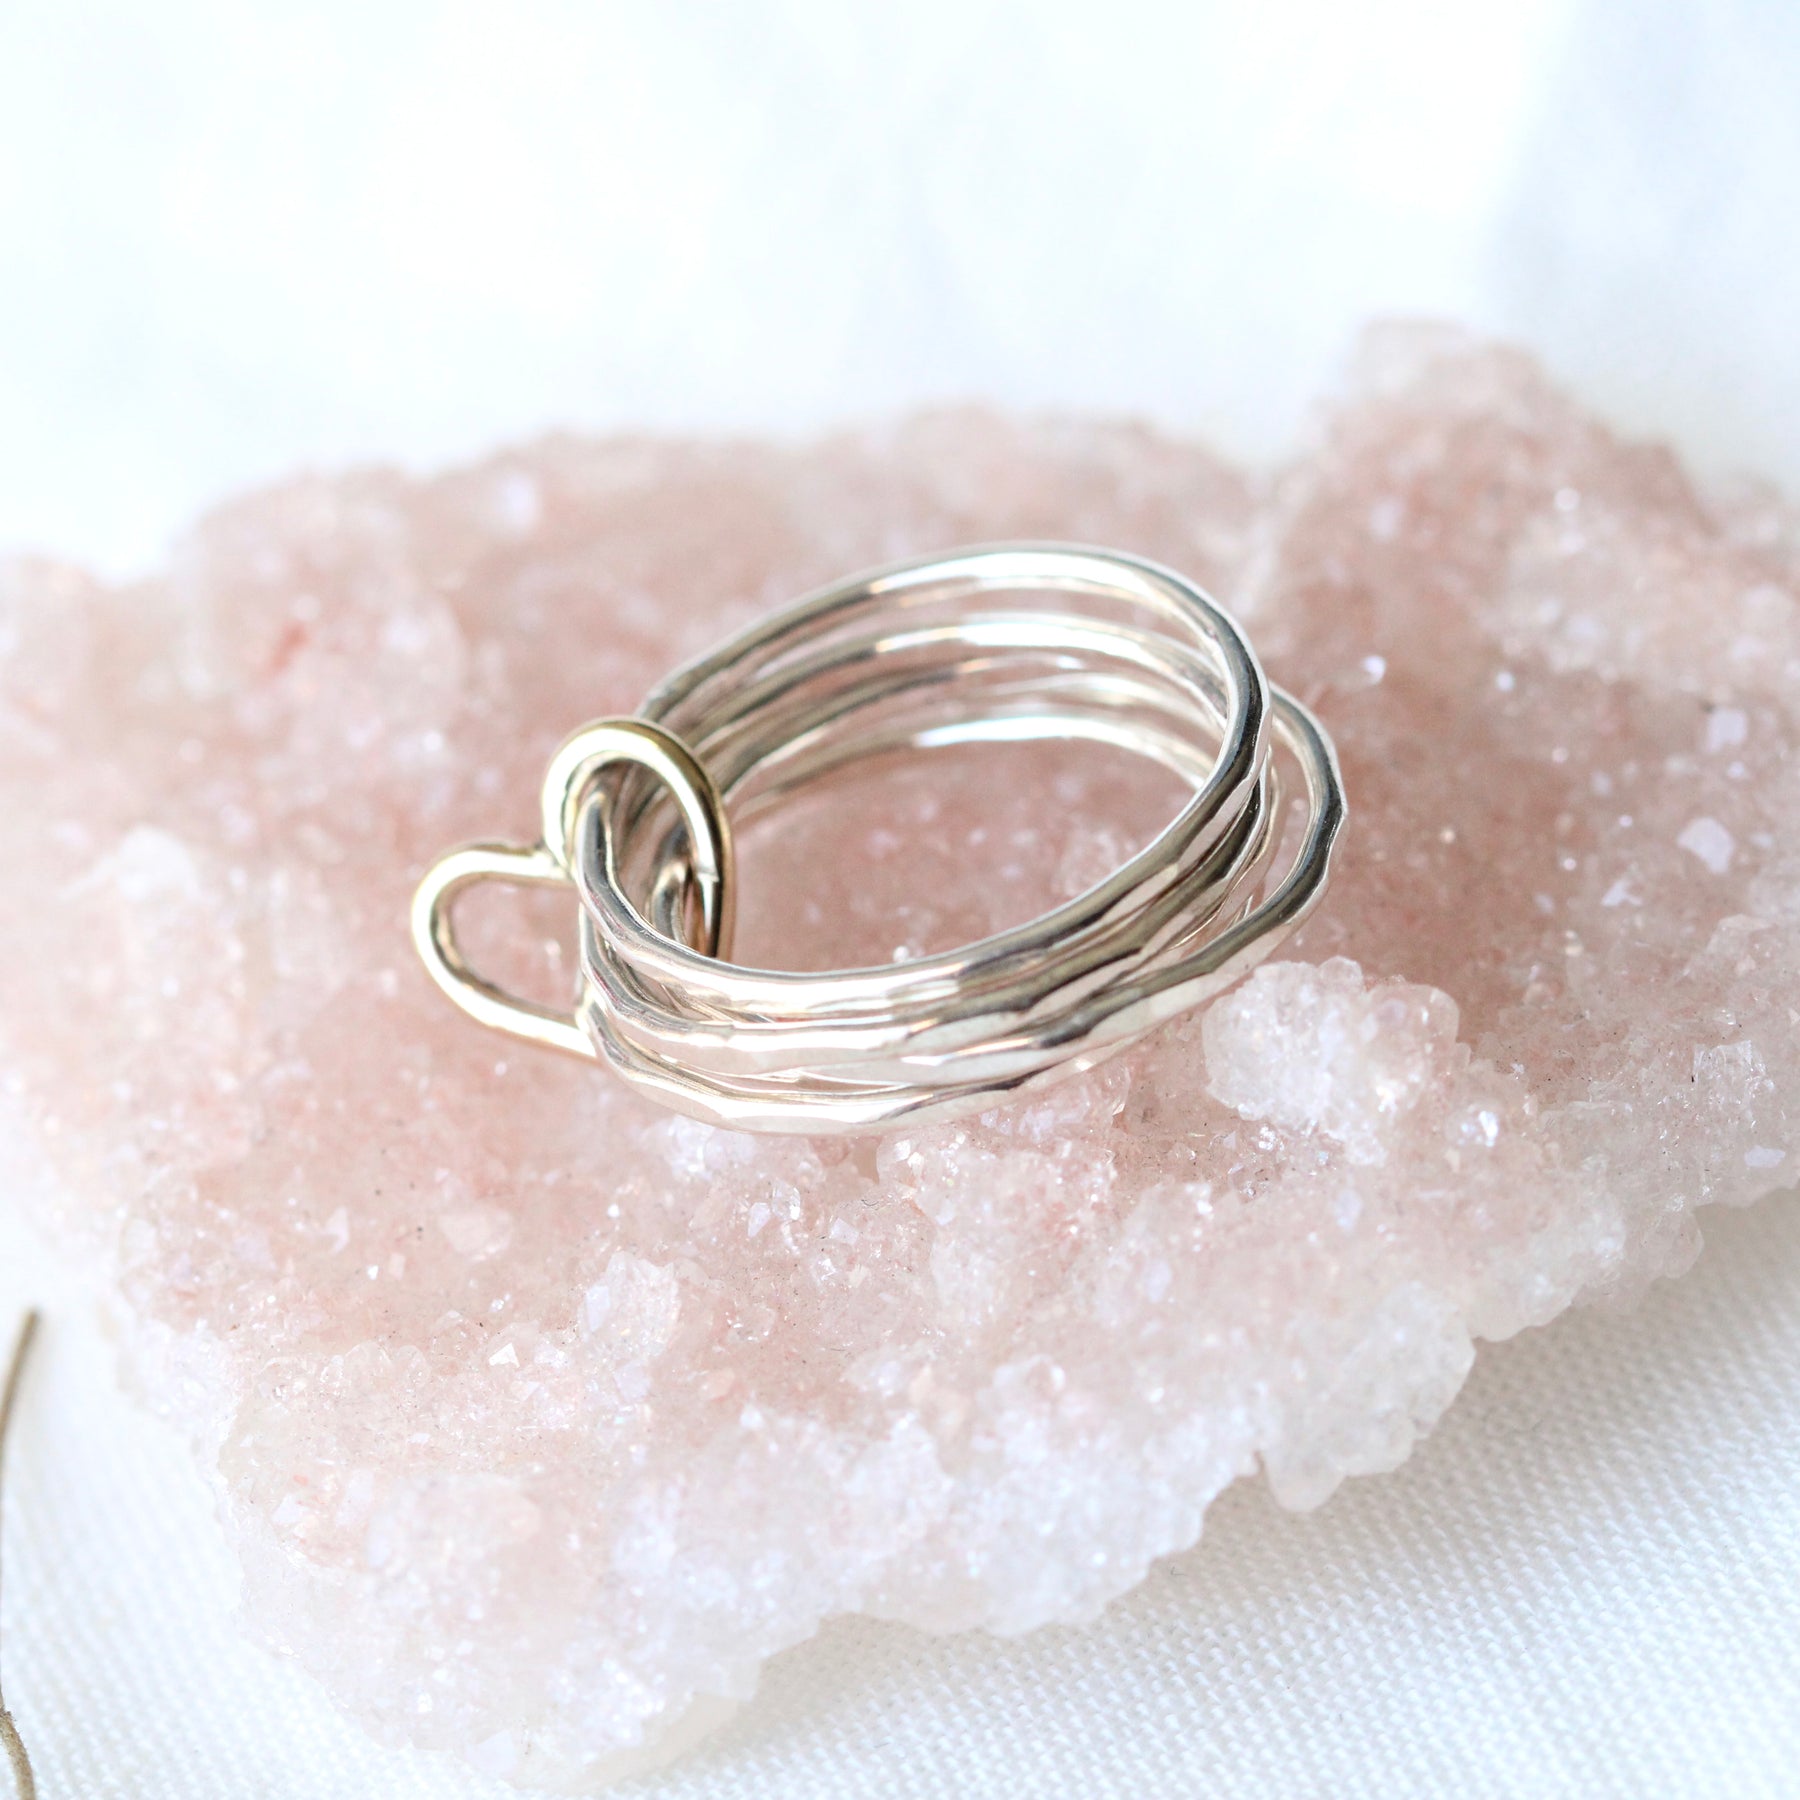 Bound By Love dainty stacking ring set